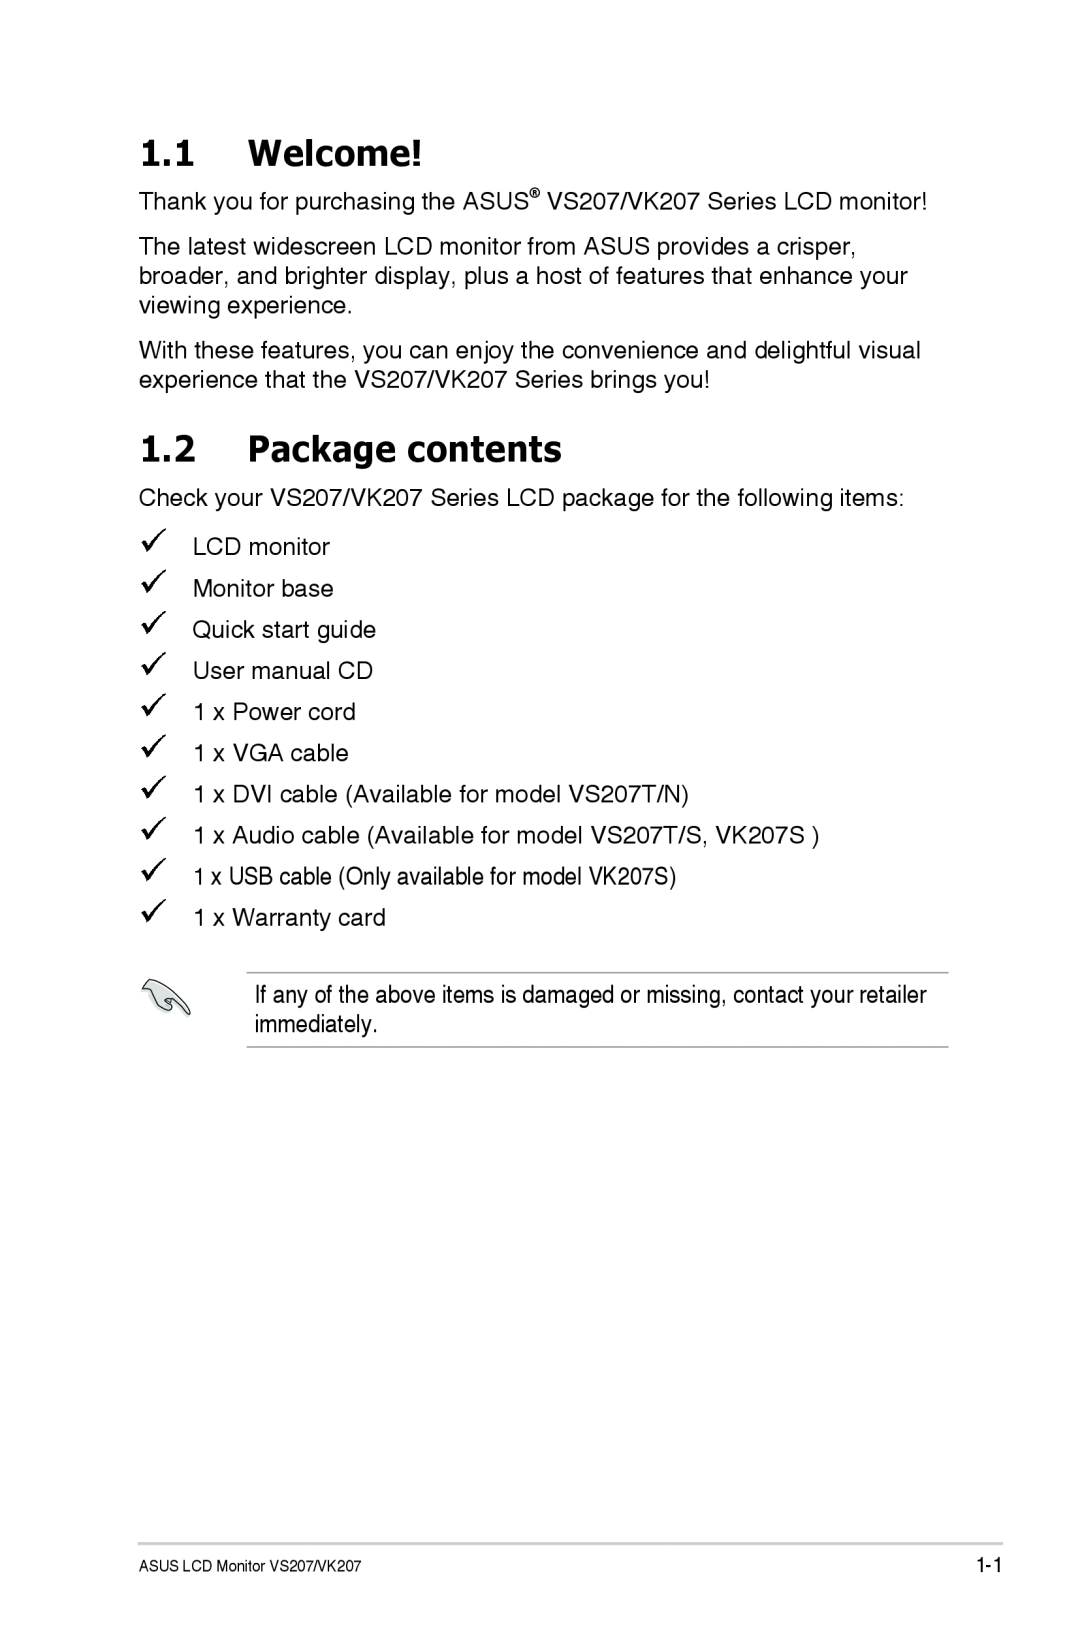 Asus VS207TP manual Welcome, Package contents 